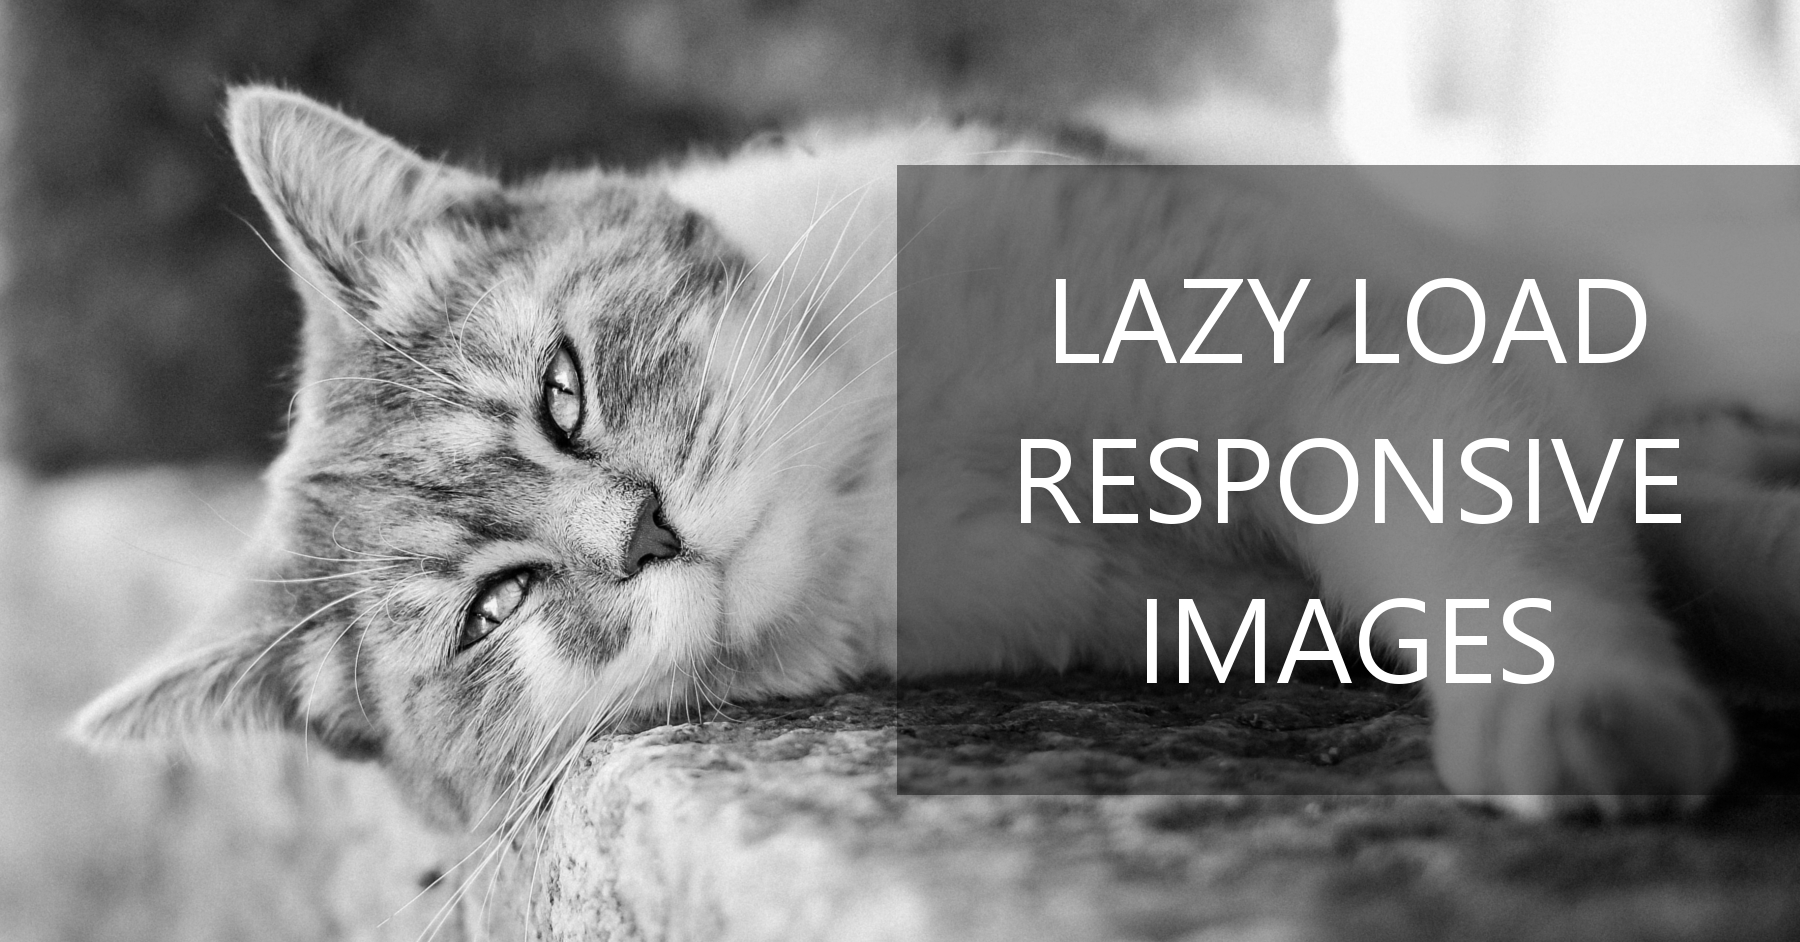 Lazy load responsive images